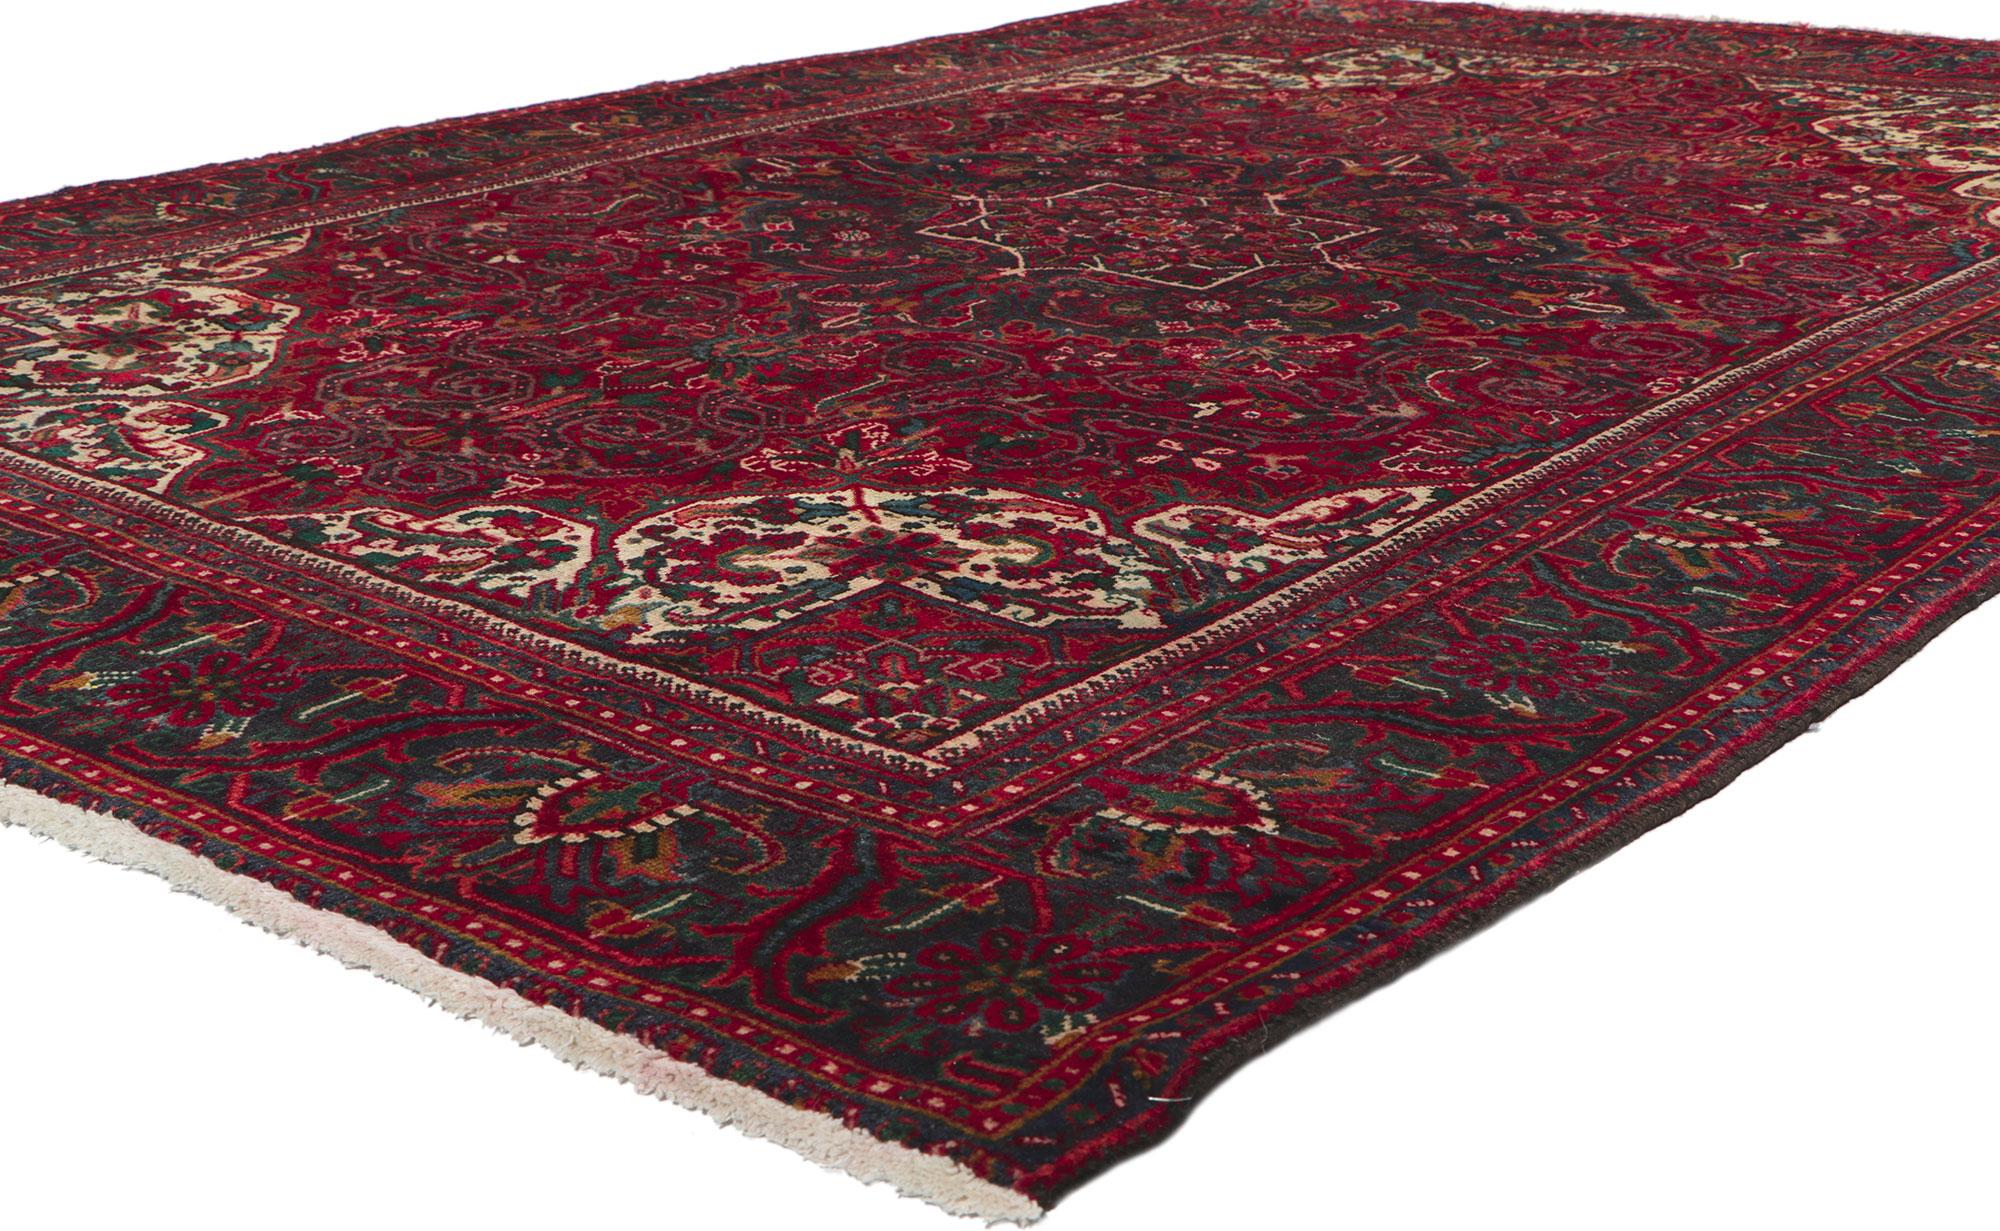 61032 Vintage Persian Heriz Rug, 06'09 x 09'07.
In an ambiance of warmth and timeless allure, behold this hand-knotted wool vintage Persian Heriz rug—a symphony of woven beauty that transcends the ordinary. The composition unfolds with a concentric